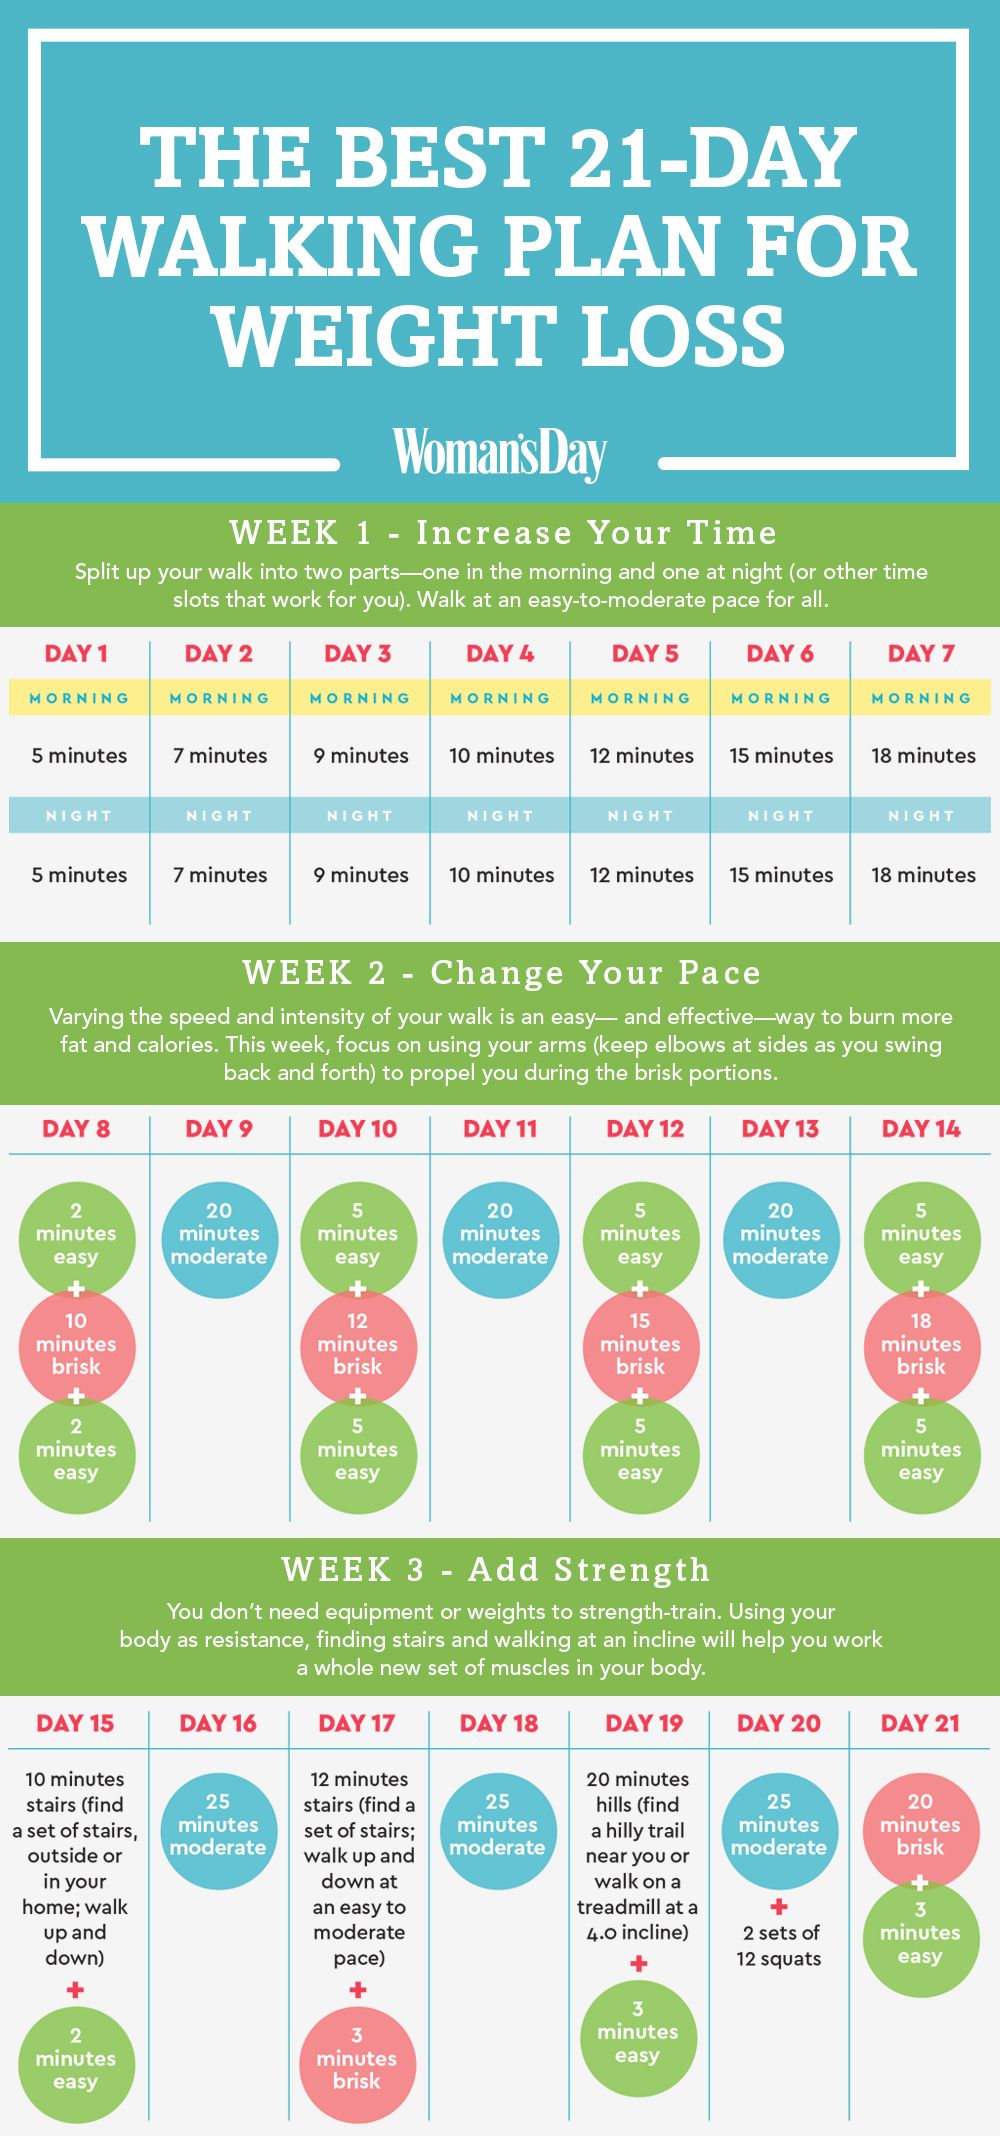 21-Day Flat-Belly Challenge